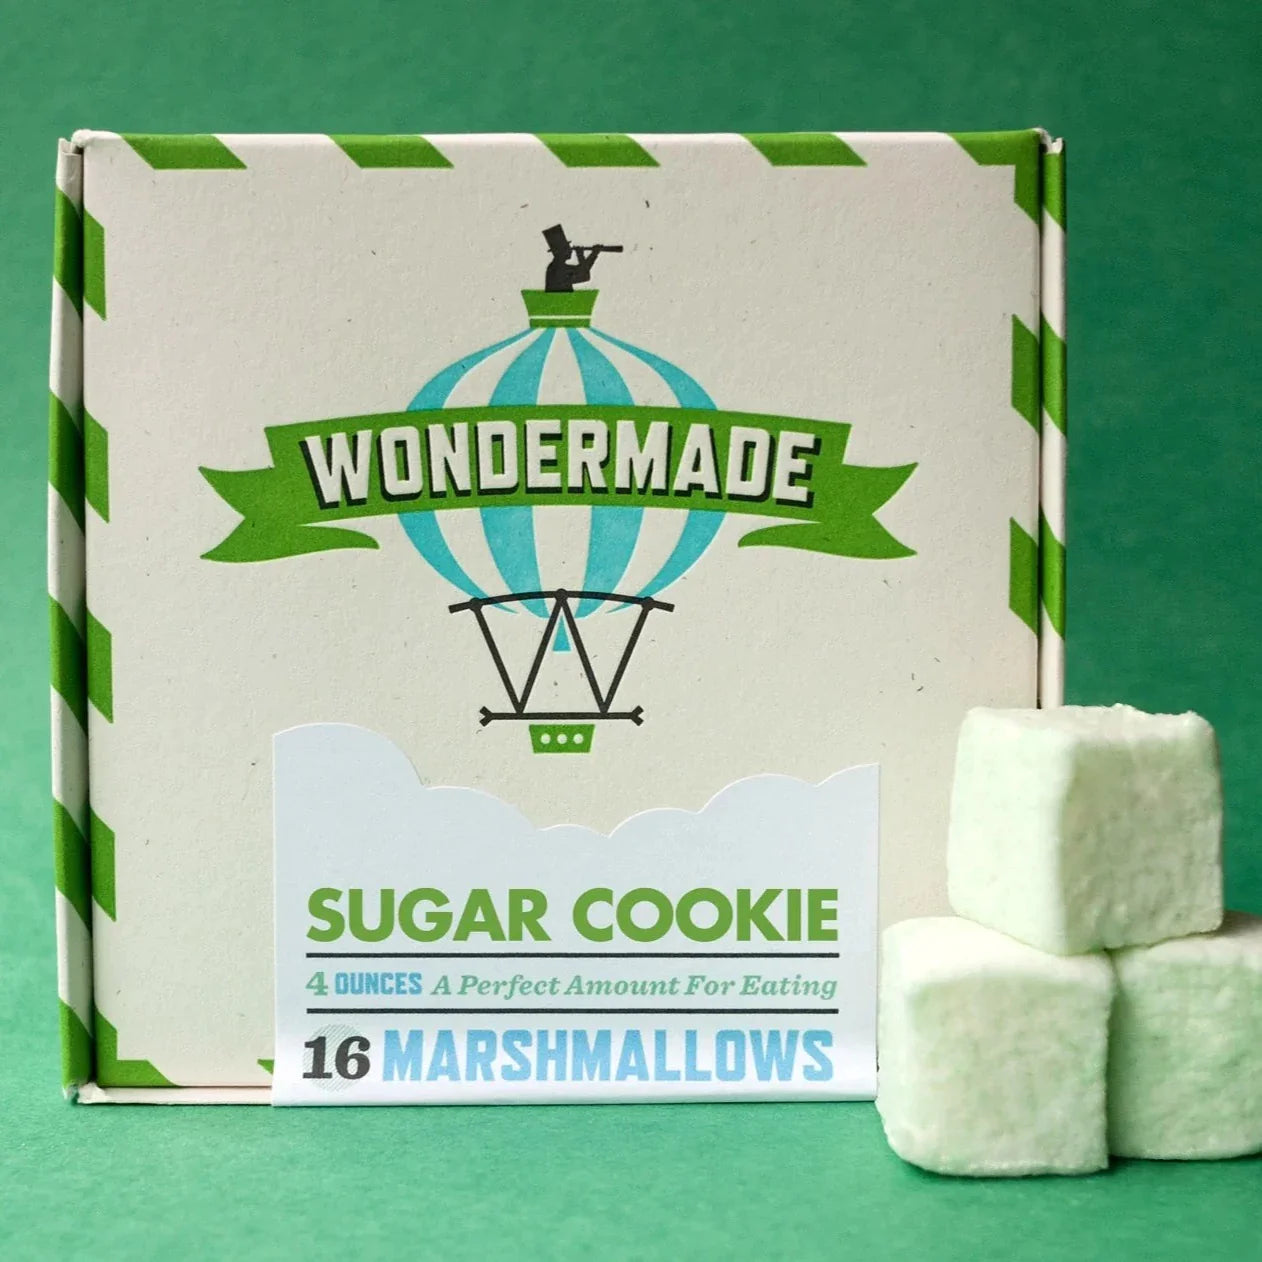 Cream square box with green lines. Box has company name and marshmallow flavor printed on the front. Three marshmallows next to the box.